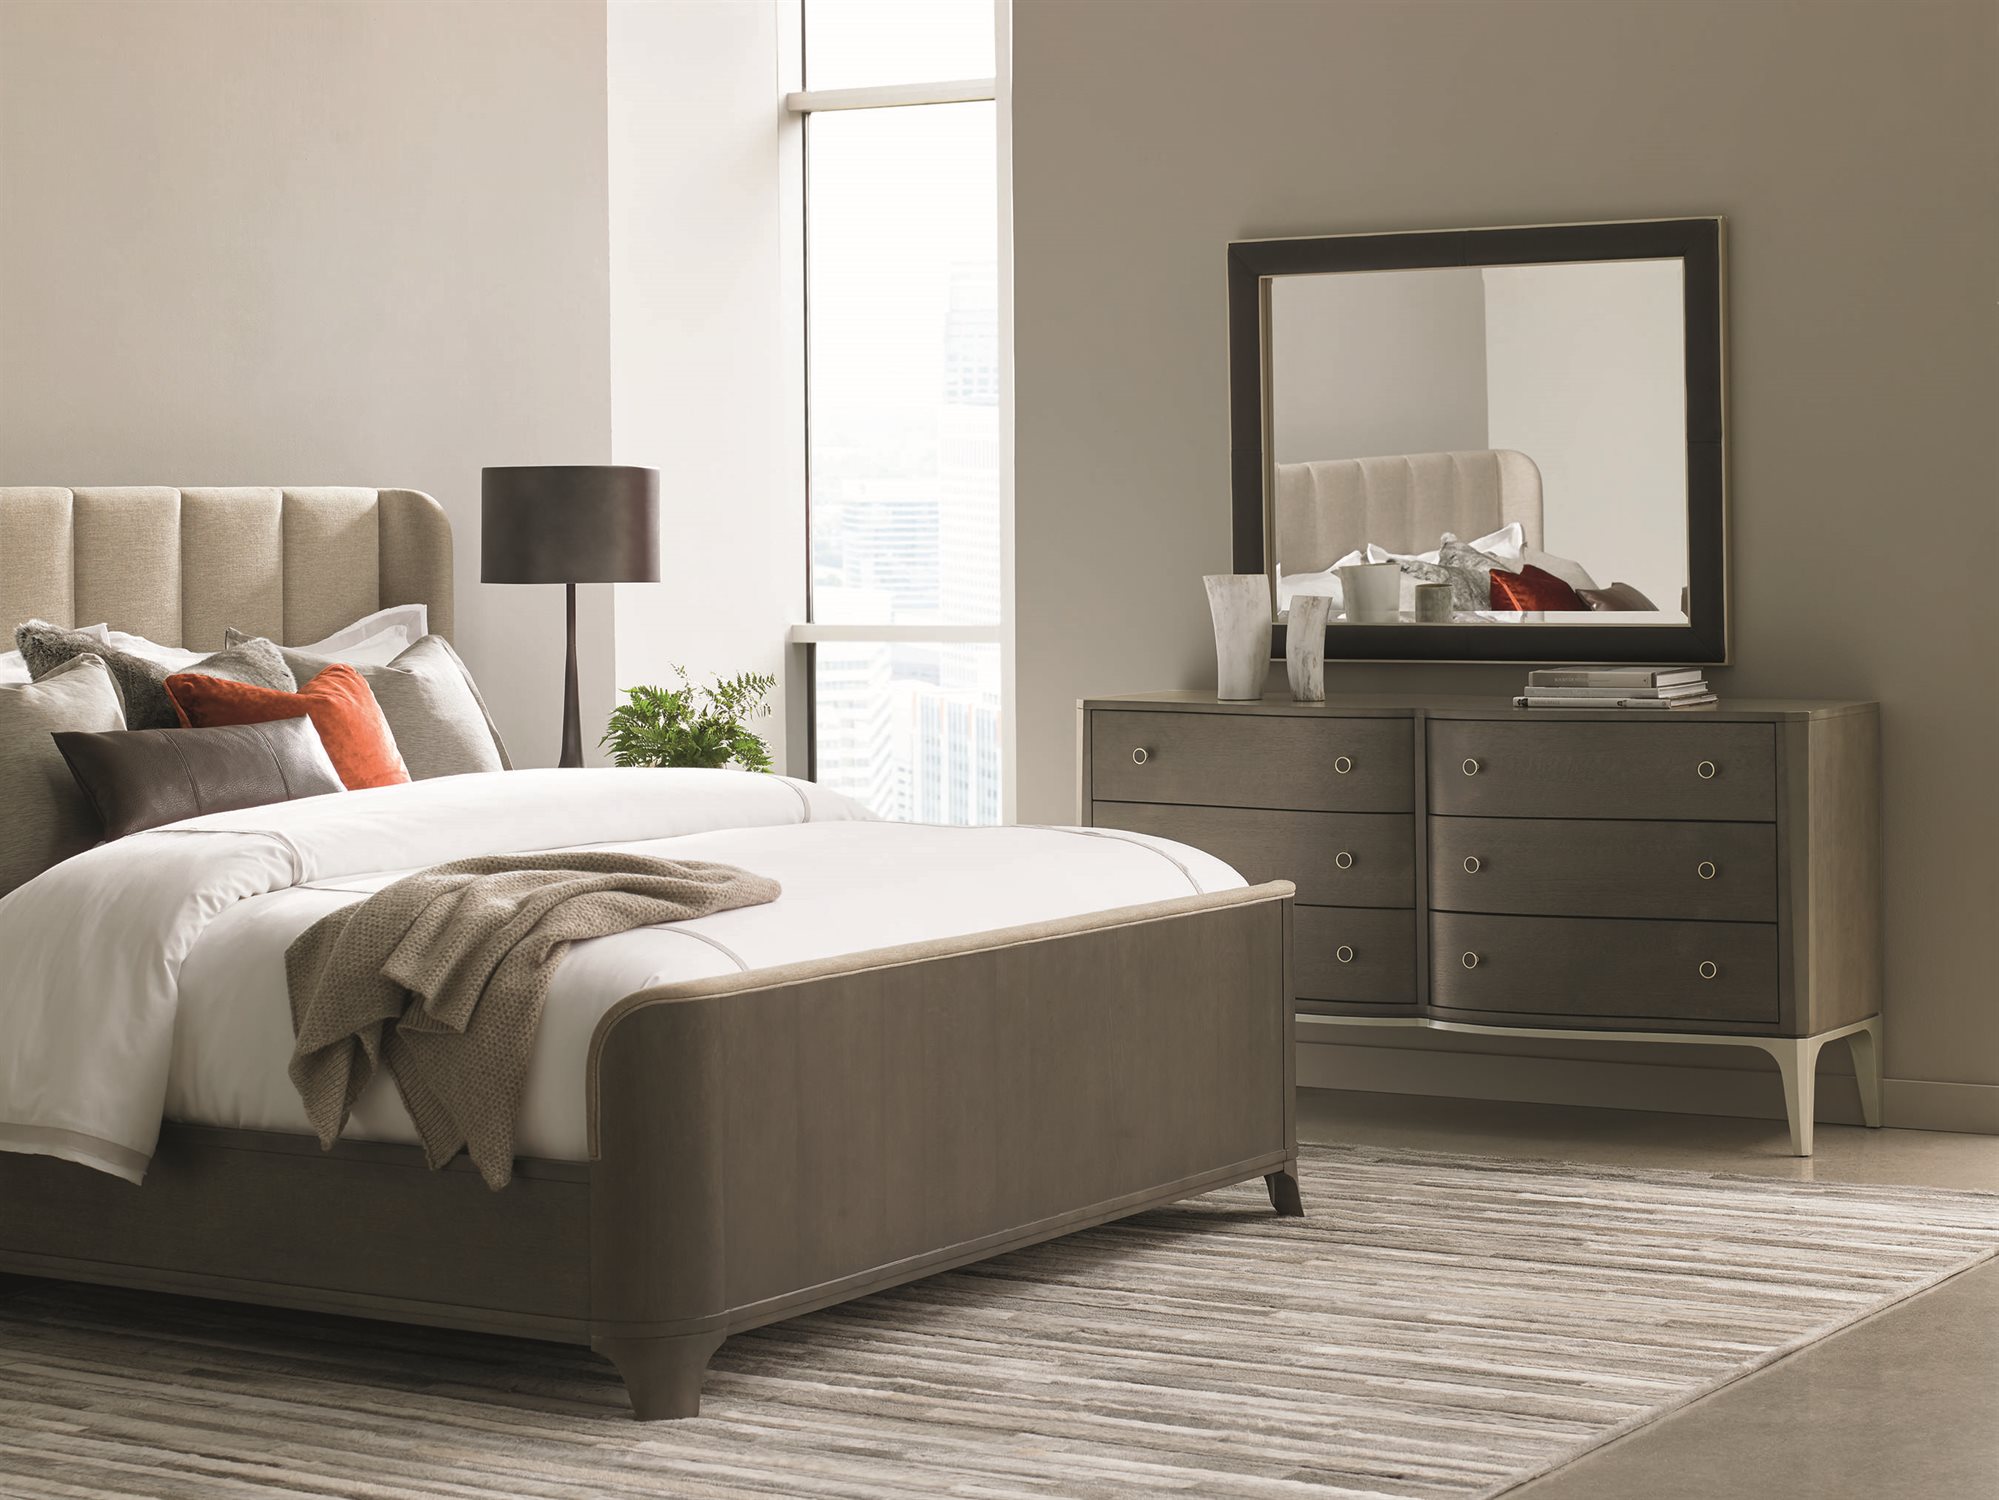 uptown bedroom furniture collection